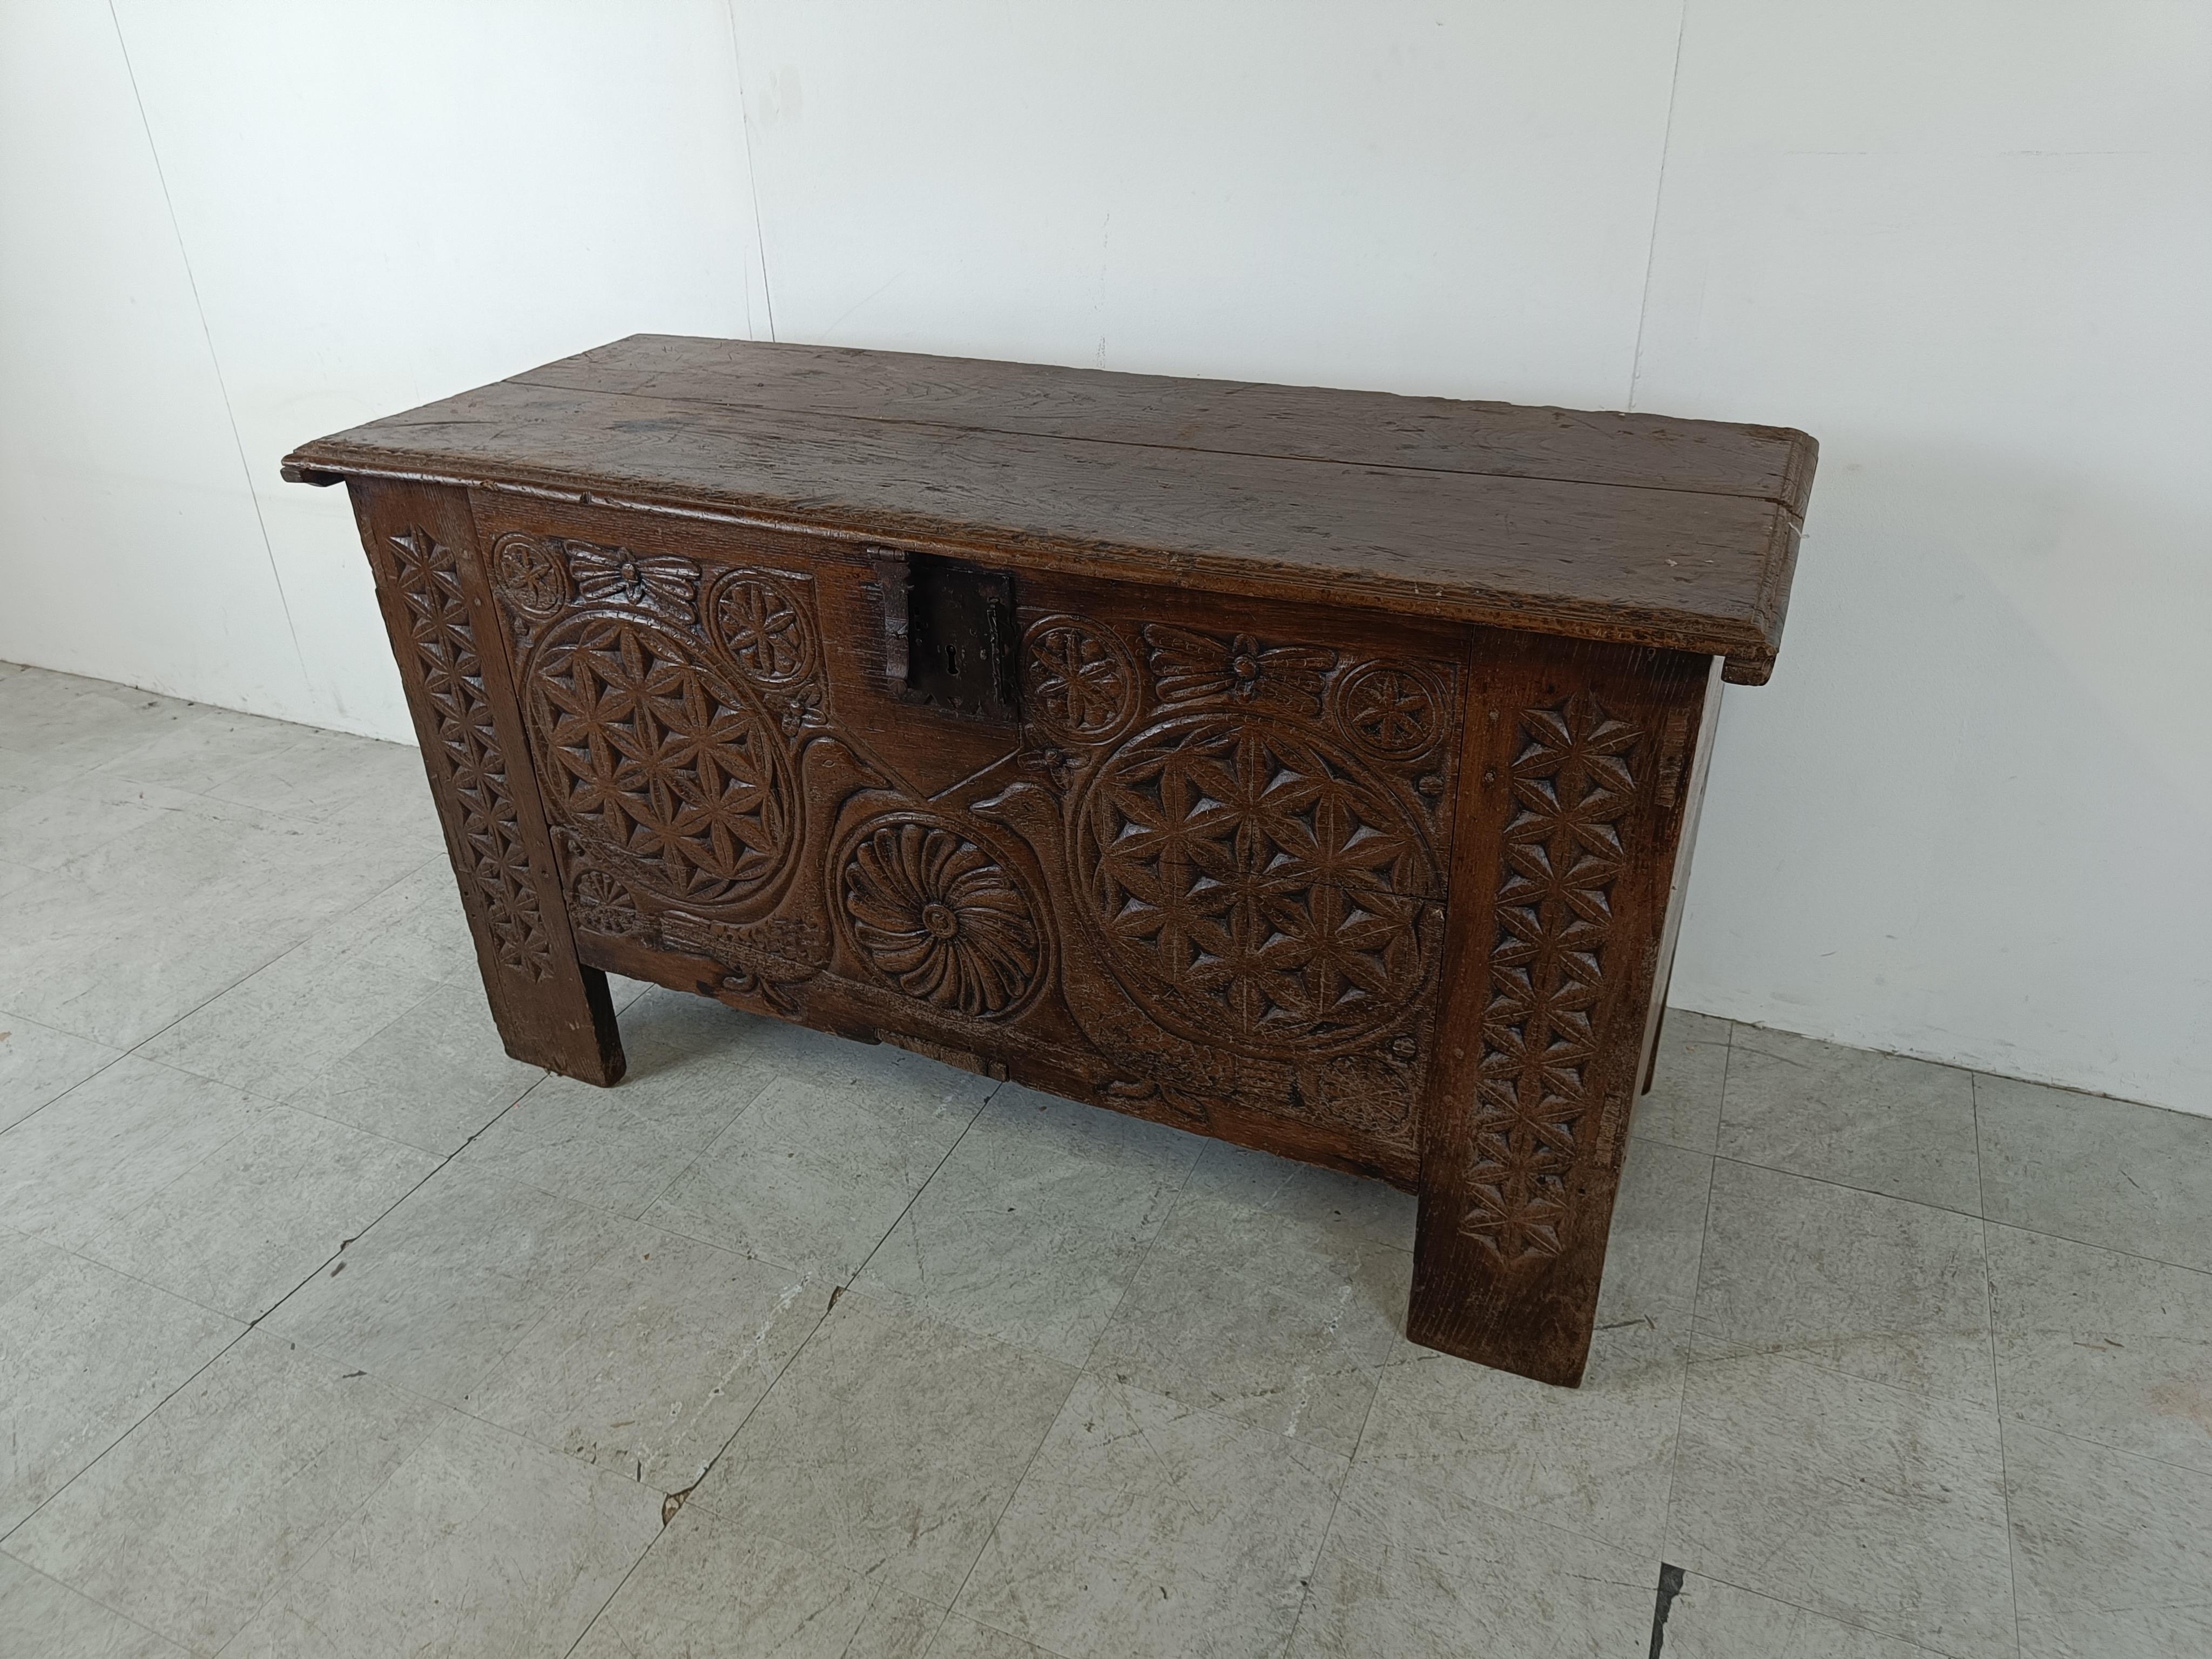 A very large flemish 18th century oak linen chest 

This can be used for general storage.

Beautifully aged wood and gorgeous carvings troughout

Mid 18th century - Belgium
​
Height: 90cm
Lenght: 160cm
Depth: 50cm

Ref.: 90303